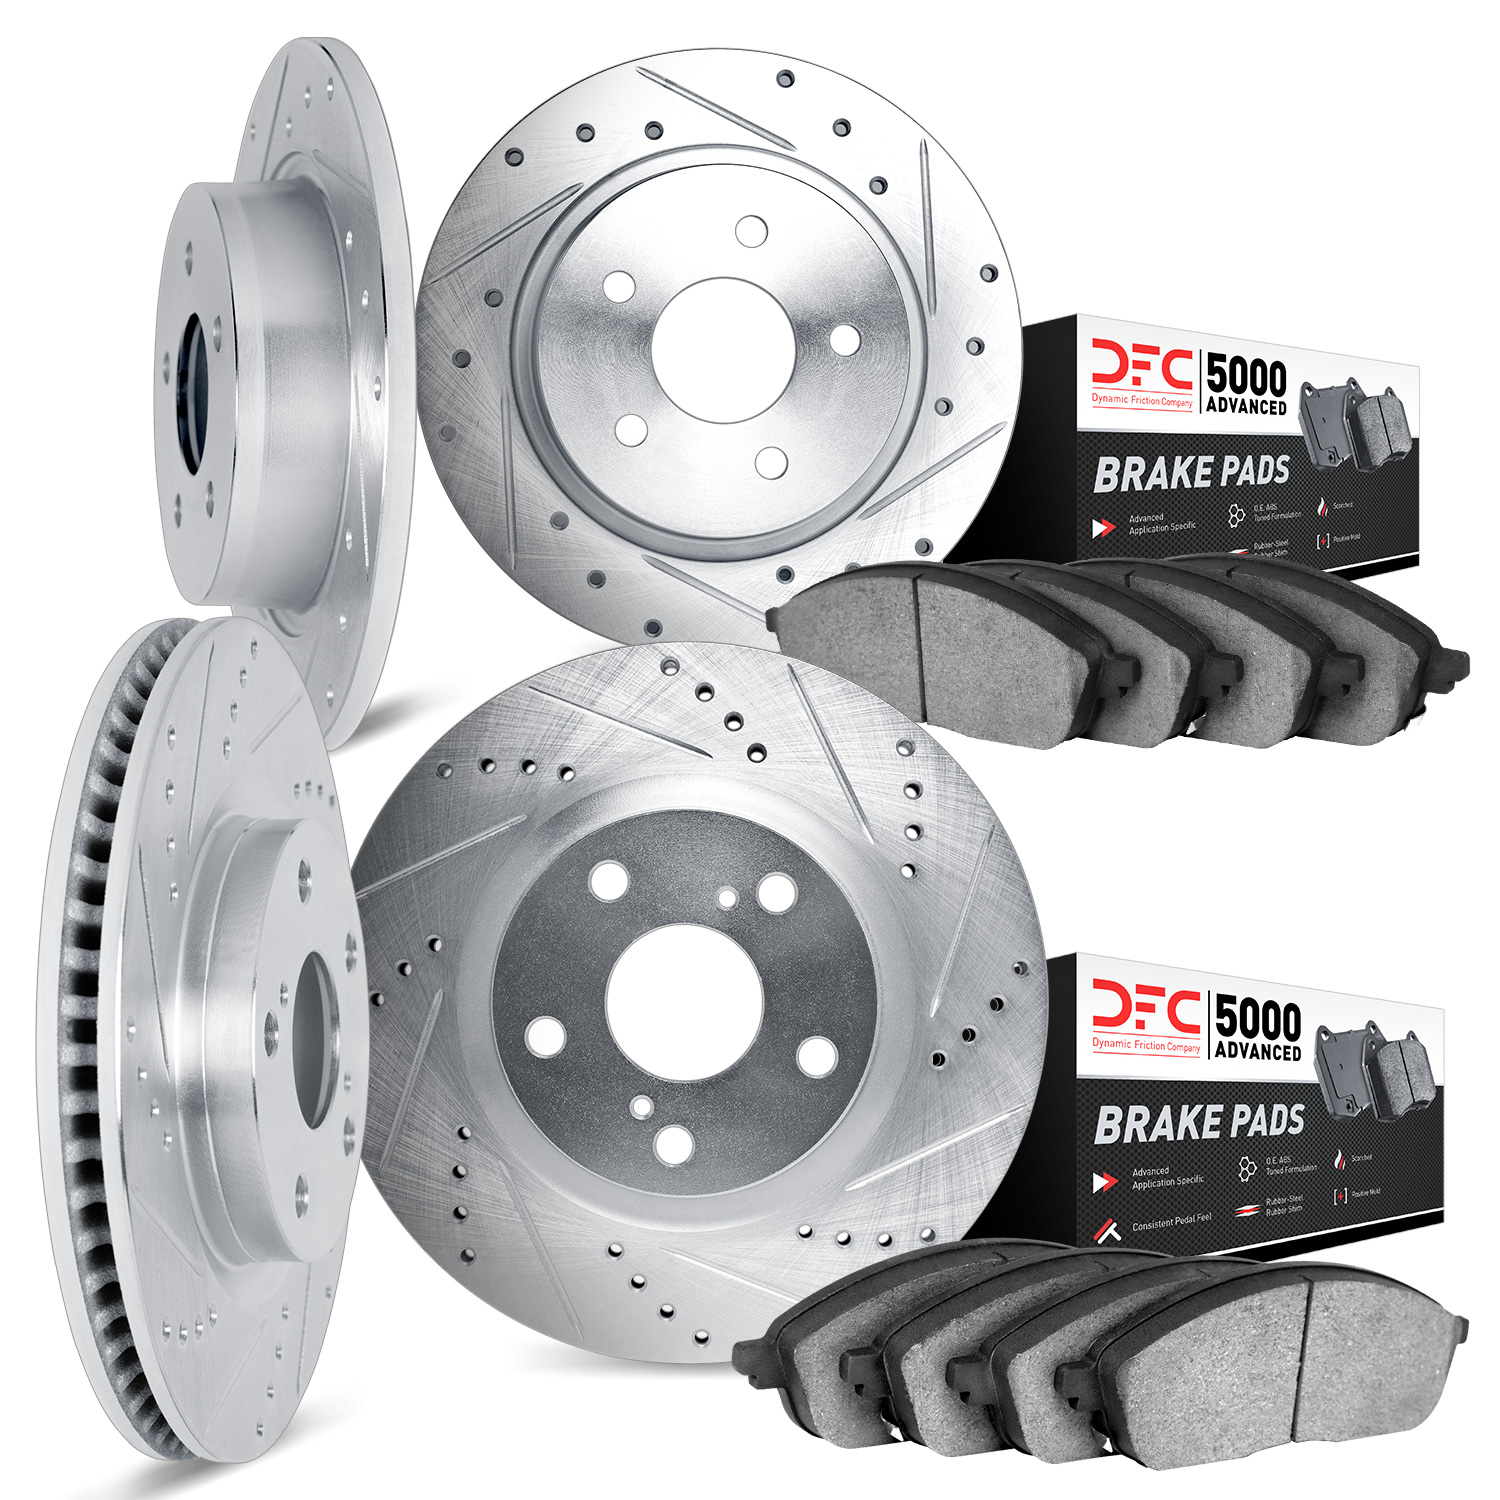 7504-74087 Drilled/Slotted Brake Rotors w/5000 Advanced Brake Pads Kit [Silver], 2006-2017 Audi/Volkswagen, Position: Front and